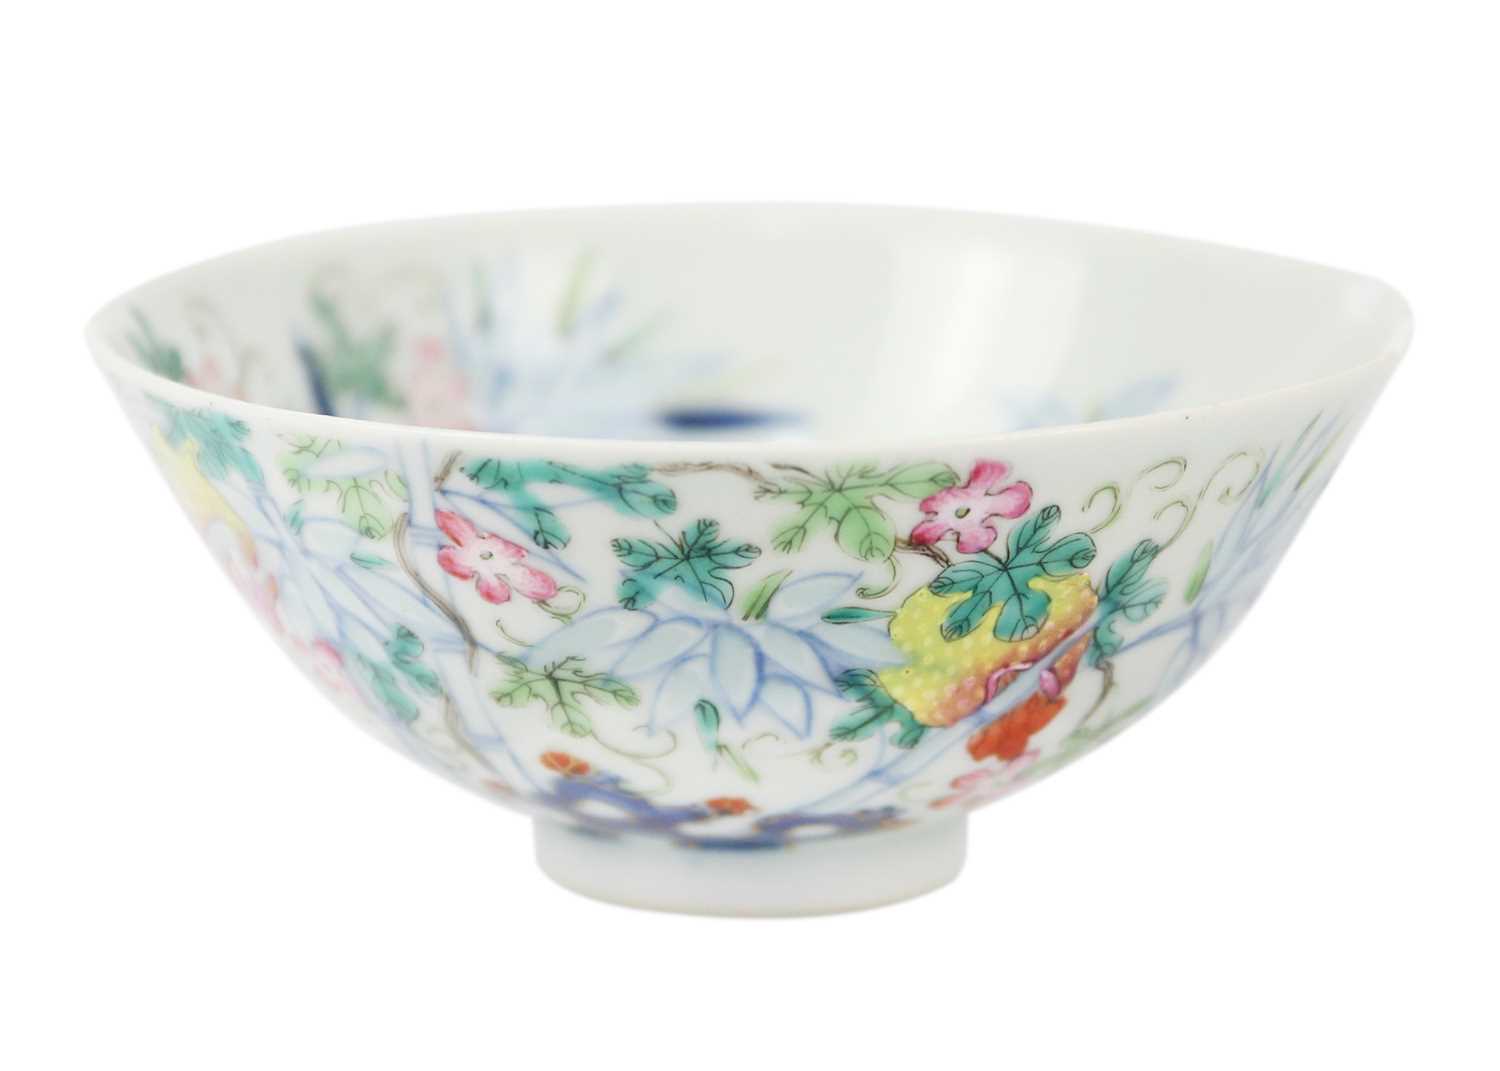 A Chinese famille rose porcelain bowl, 19th century.